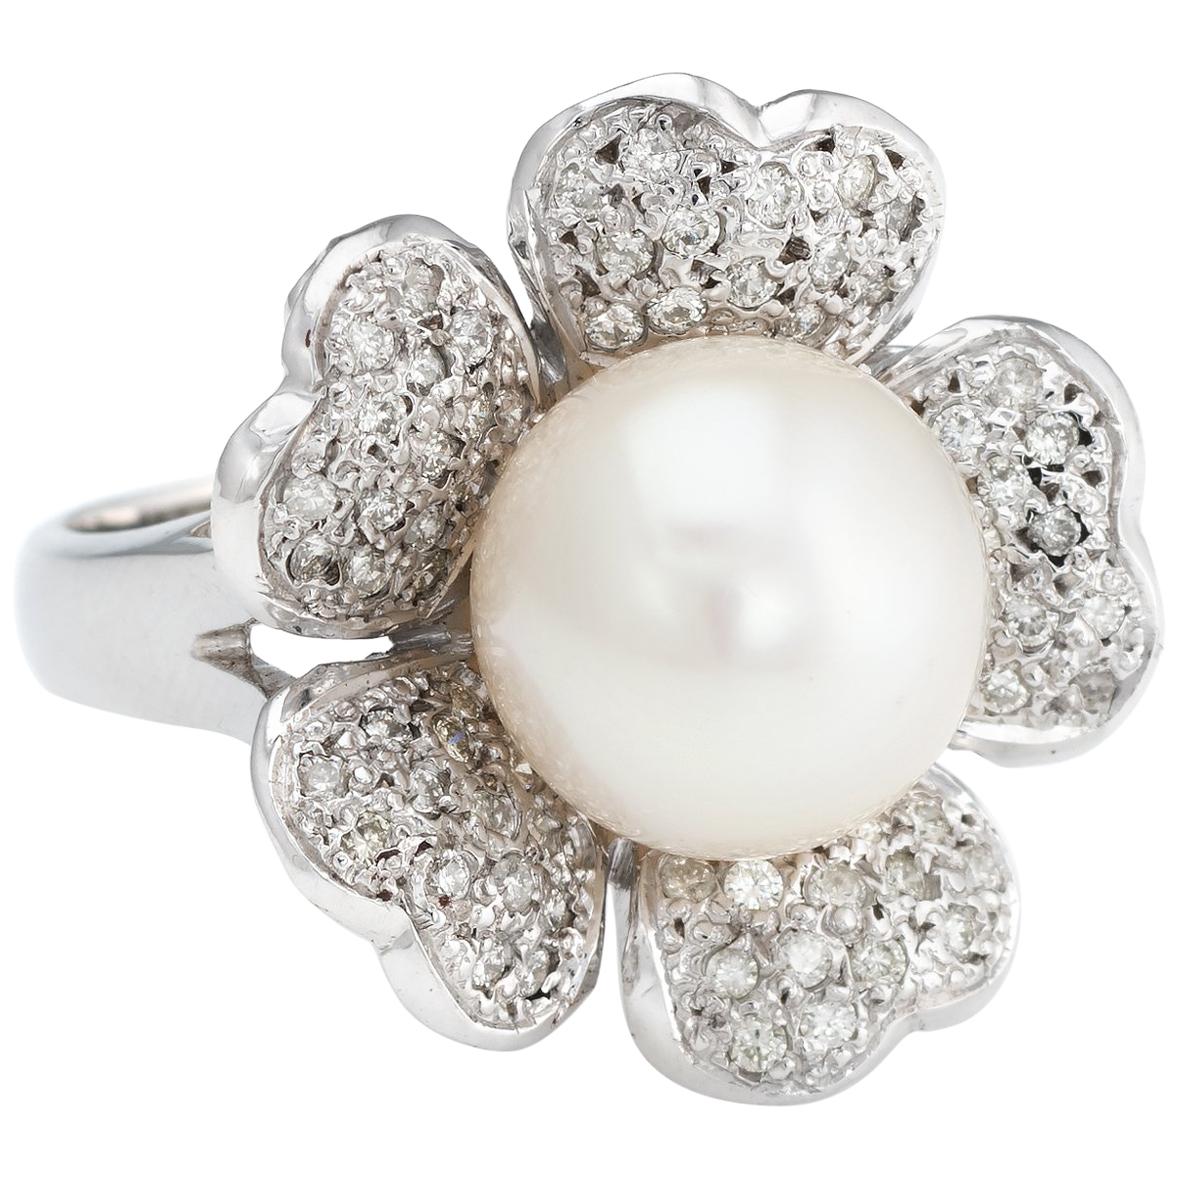 Vintage Cultured South Sea Pearl Diamond Ring 14 Karat White Gold Flower Jewelry